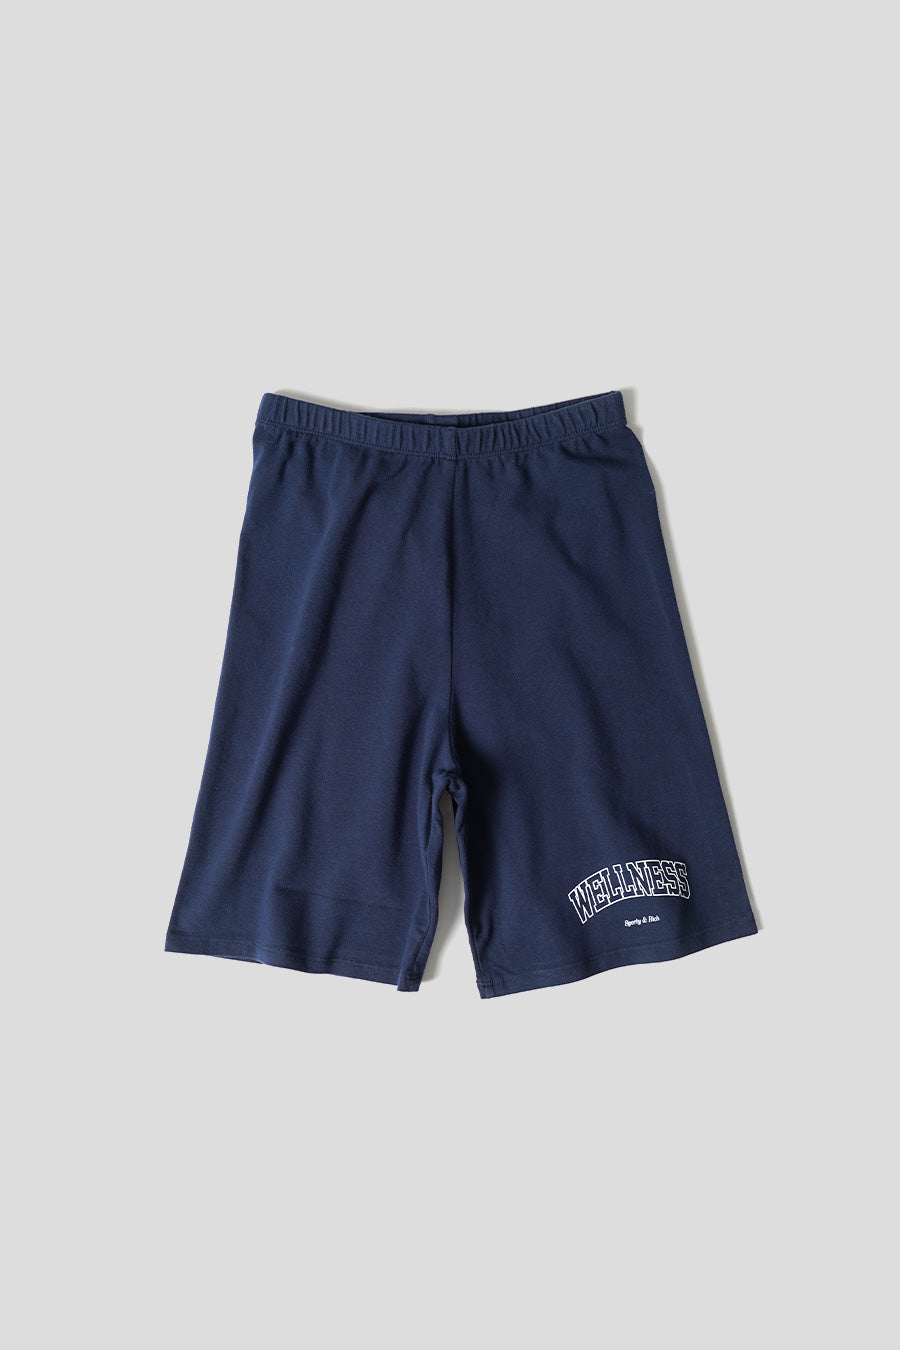 Sporty & Rich - WELLNESS CYCLING SHORTS NAVY BLUE - LE LABO STORE